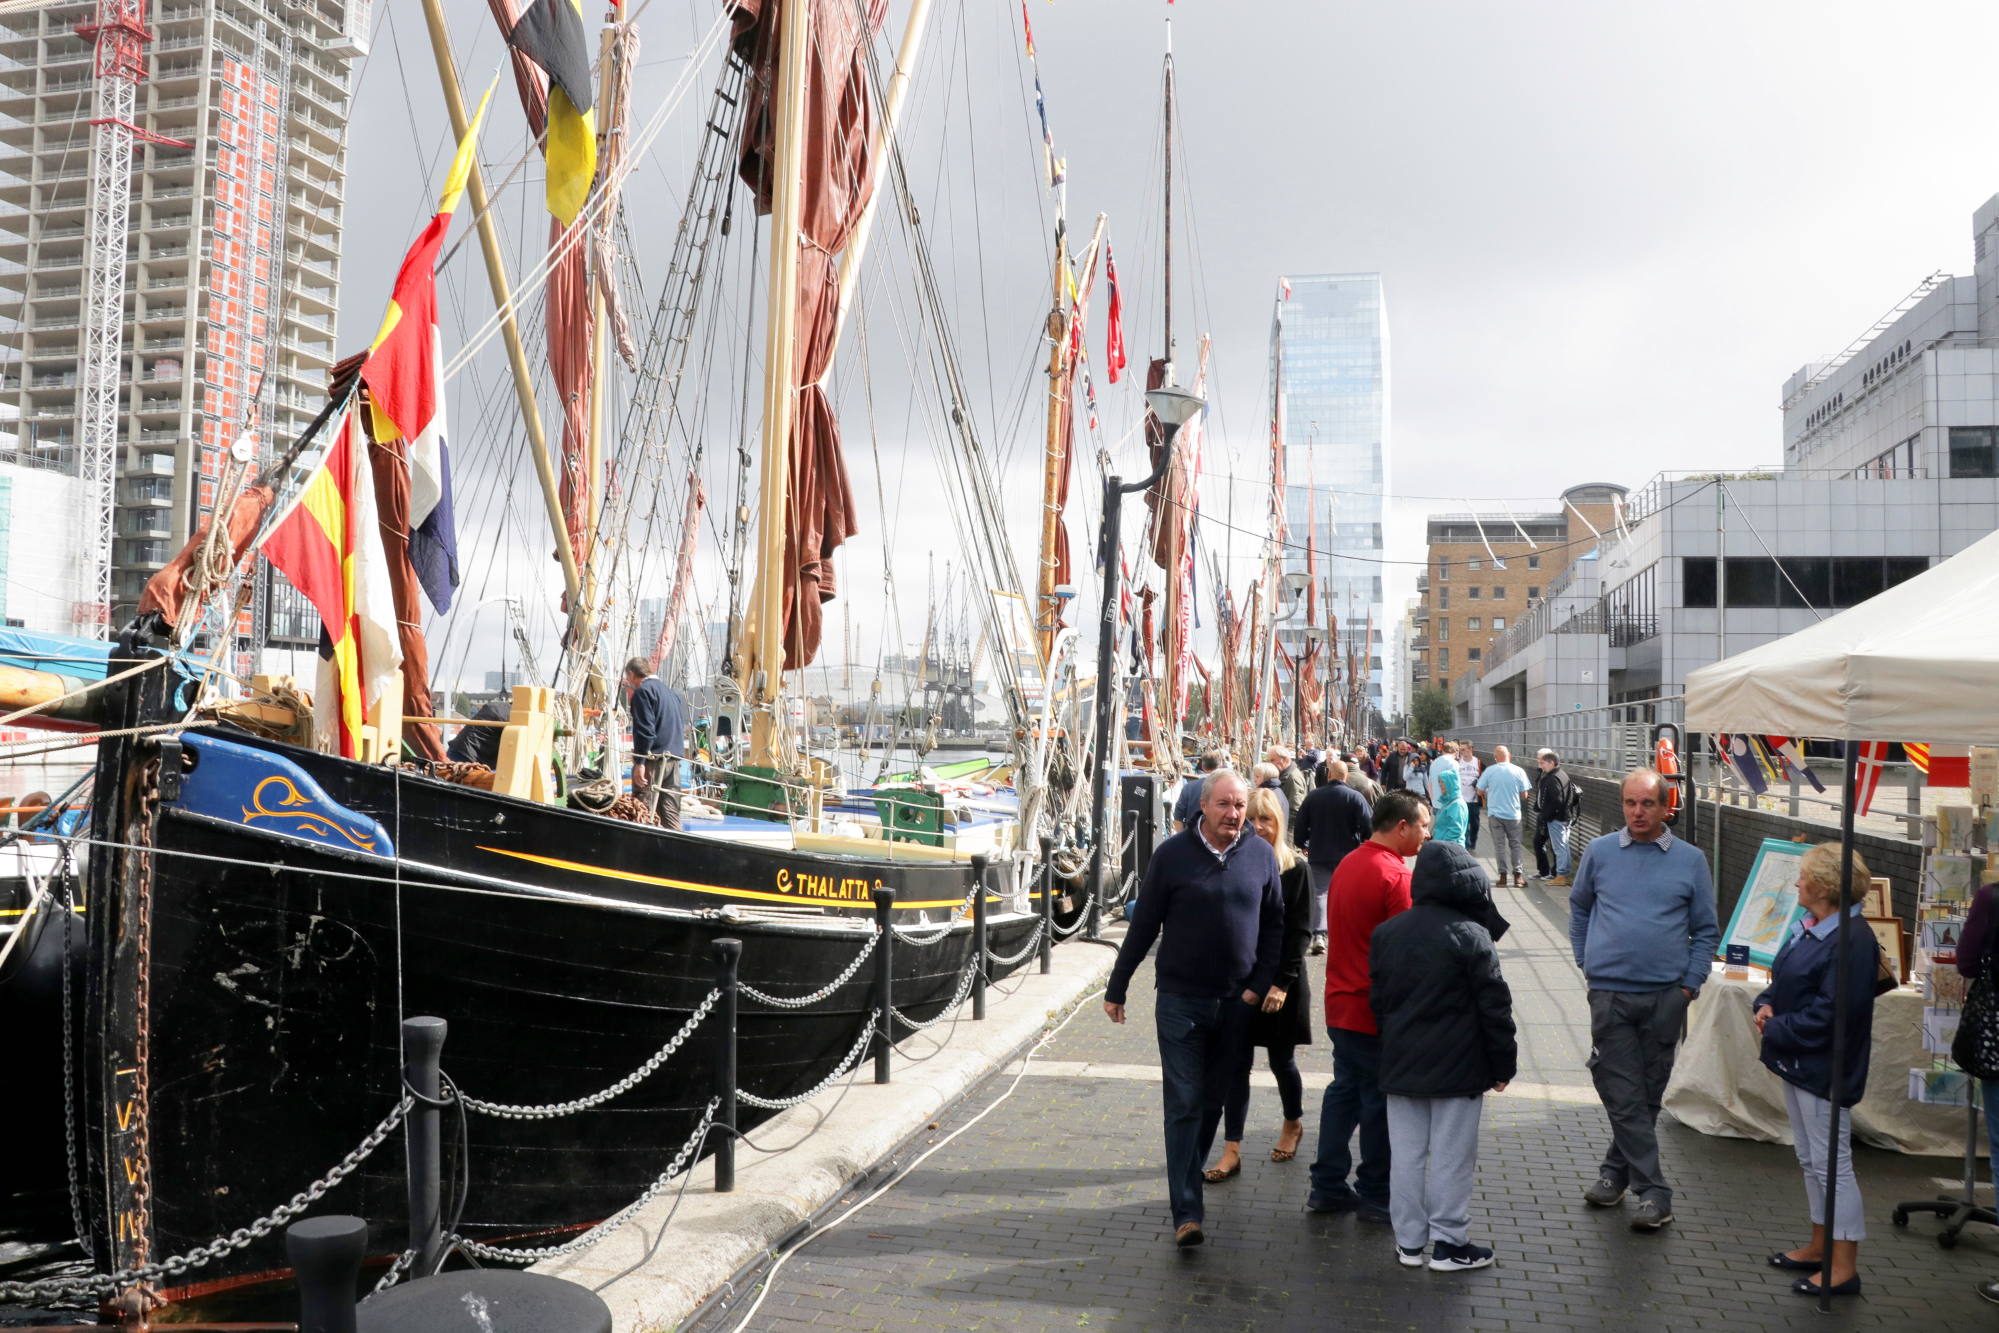 The Popup Museum at West India Dock, 17th September 2017, with Sailing Barge Thalatta in the foreground